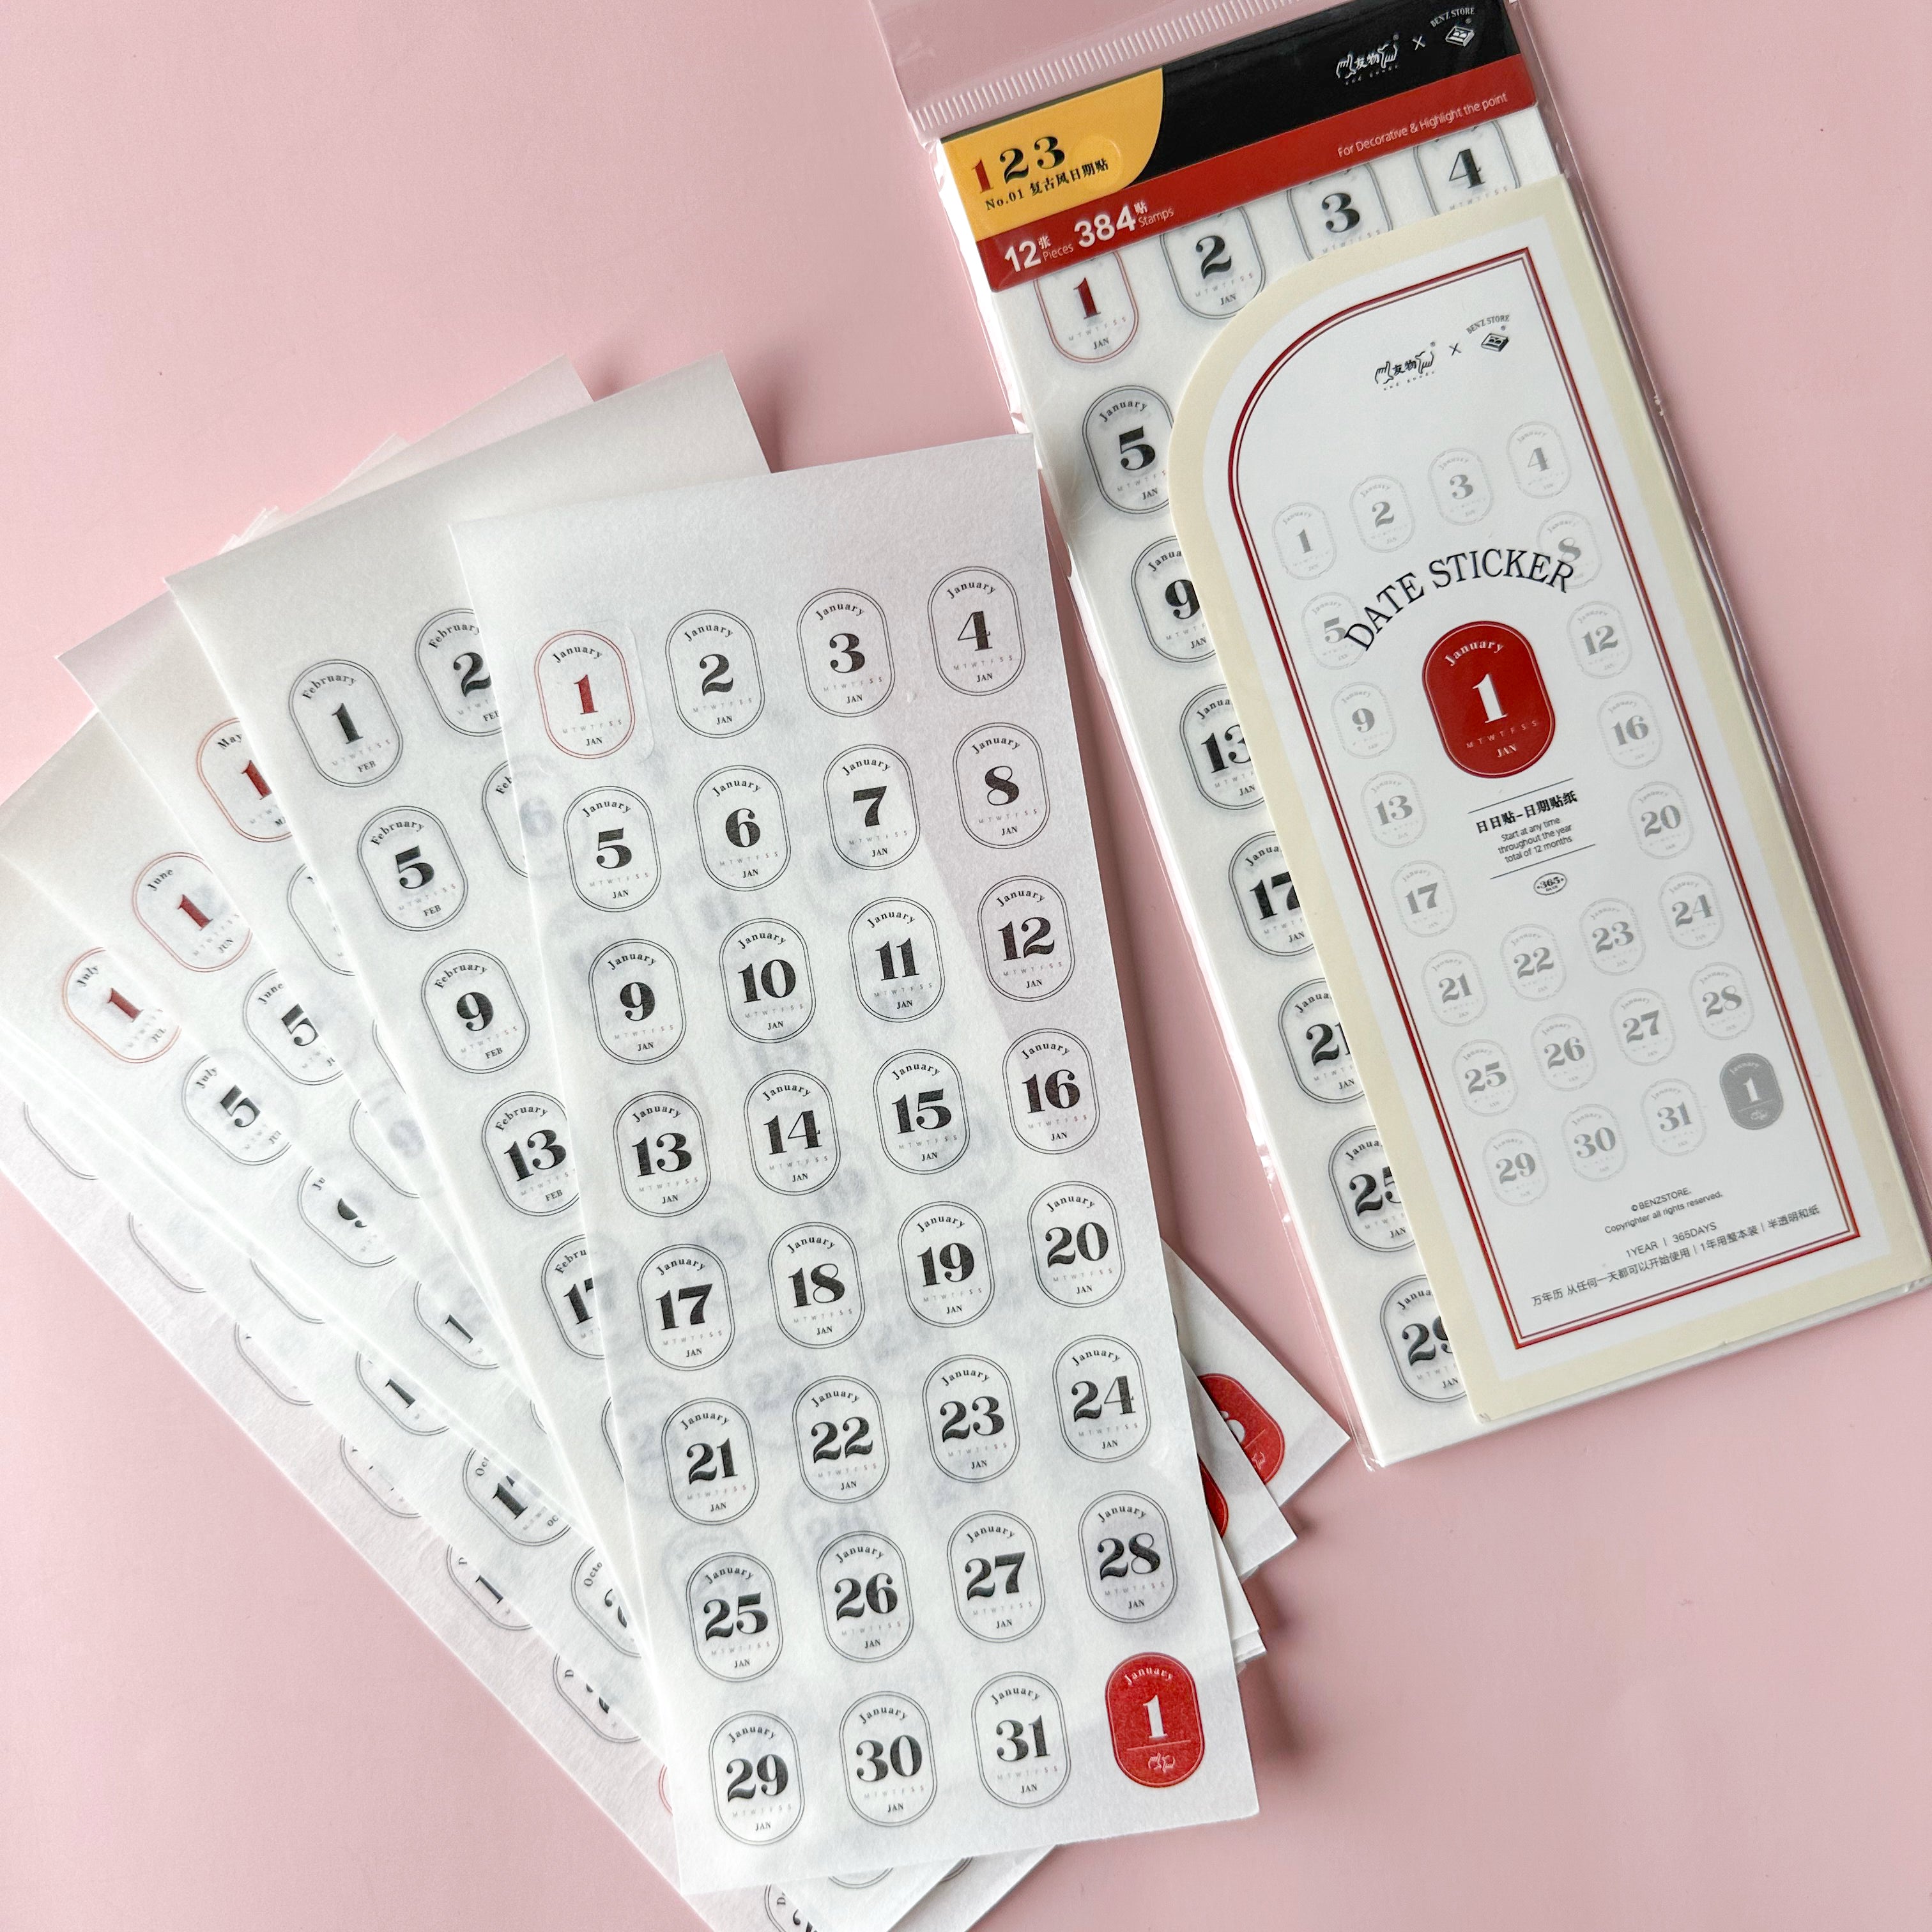 These pre-made monthly and daily dates is perfect for your monthly BUJO spread or planner. These stickers are sold at BBB Supplies Craft Shop.